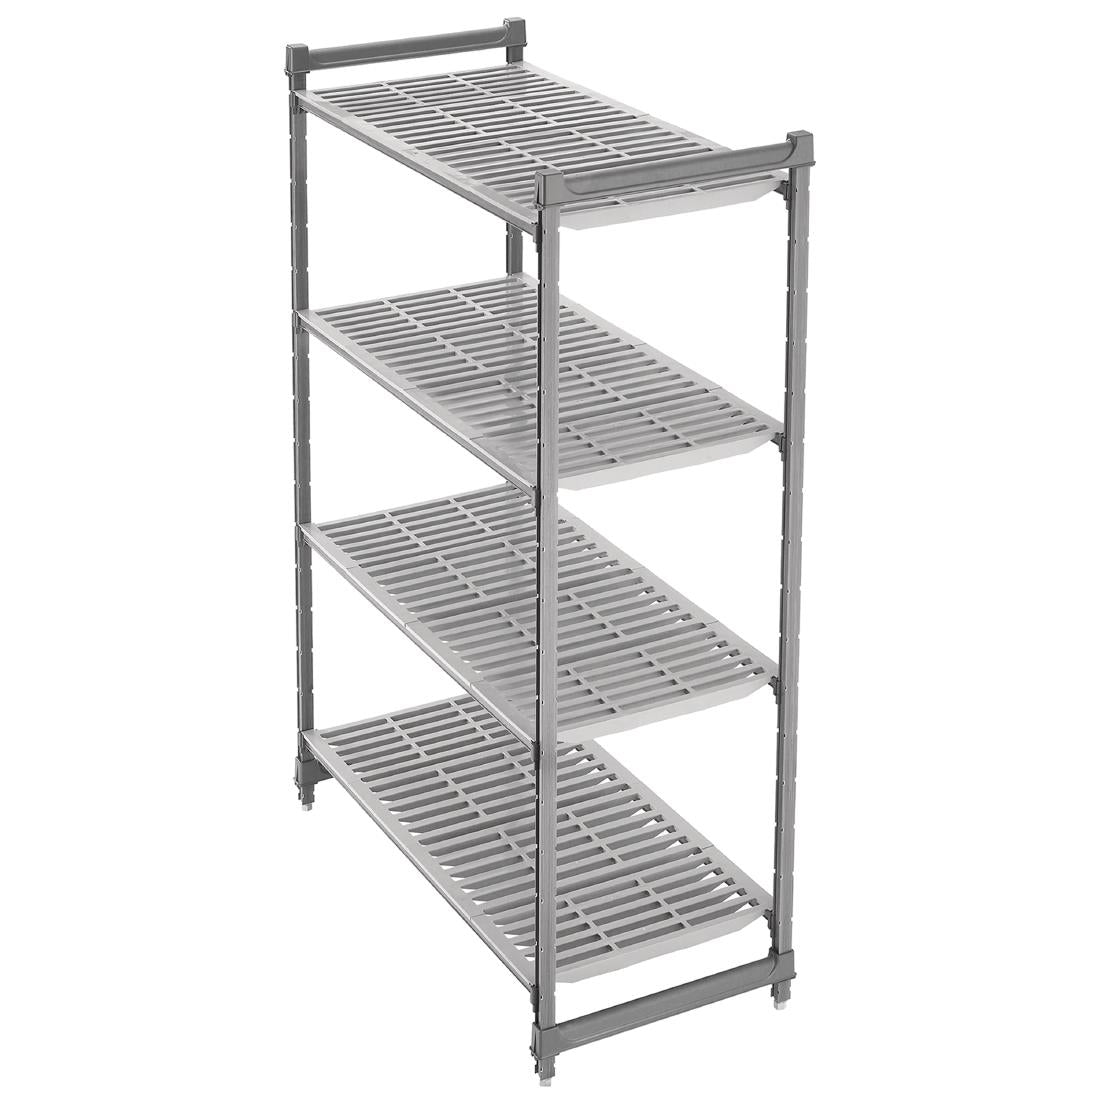 GH619 Cambro Stationary Vented 4 Shelving Units 1830 x 1530 x 460mm JD Catering Equipment Solutions Ltd